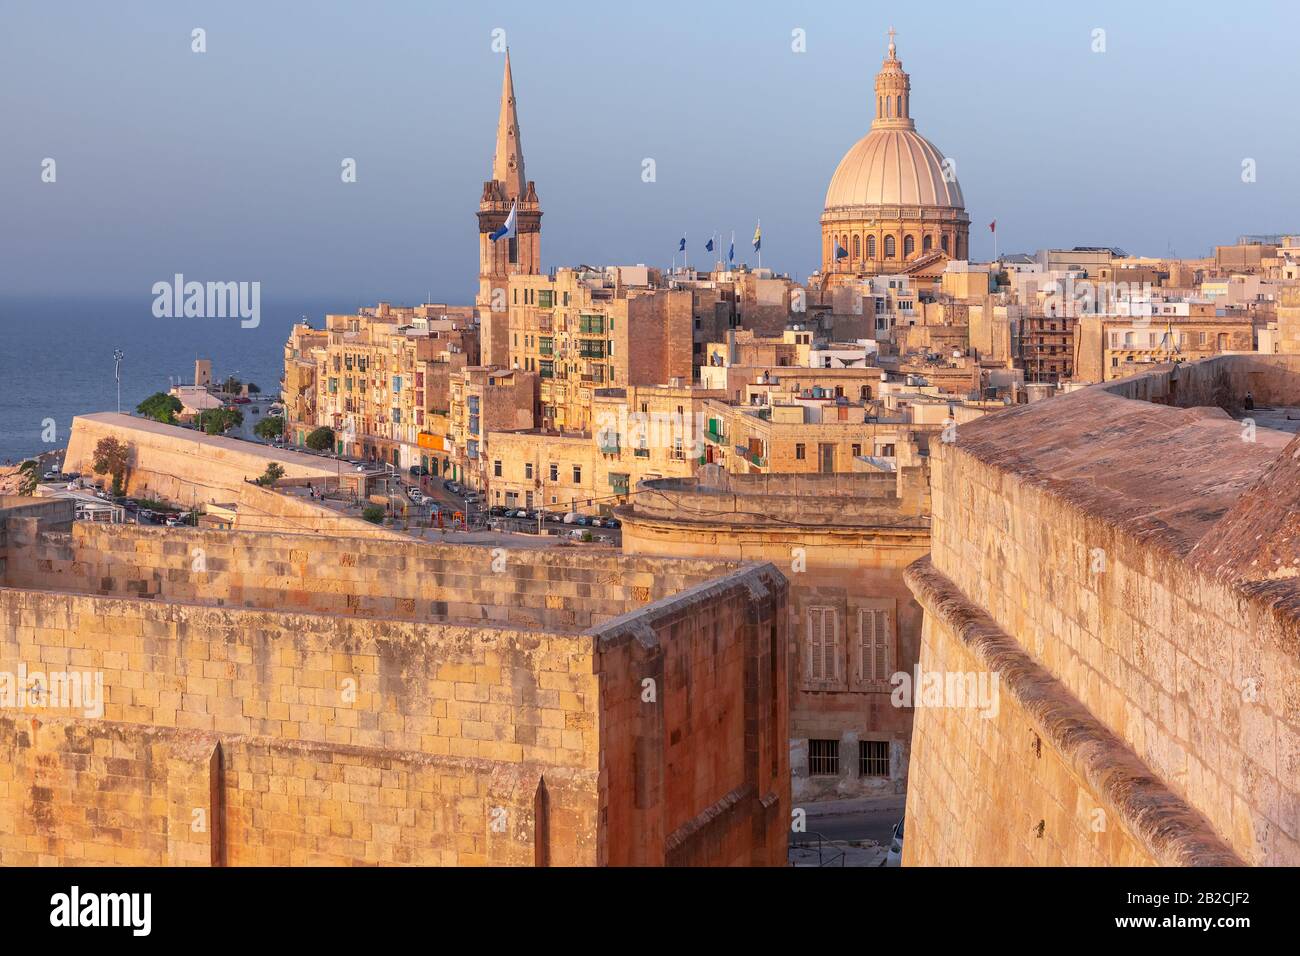 View of Old town roofs, fortress, Our Lady of Mount Carmel church and St. Paul's Anglican Pro-Cathedral at sunset , Valletta, Capital city of Malta Stock Photo